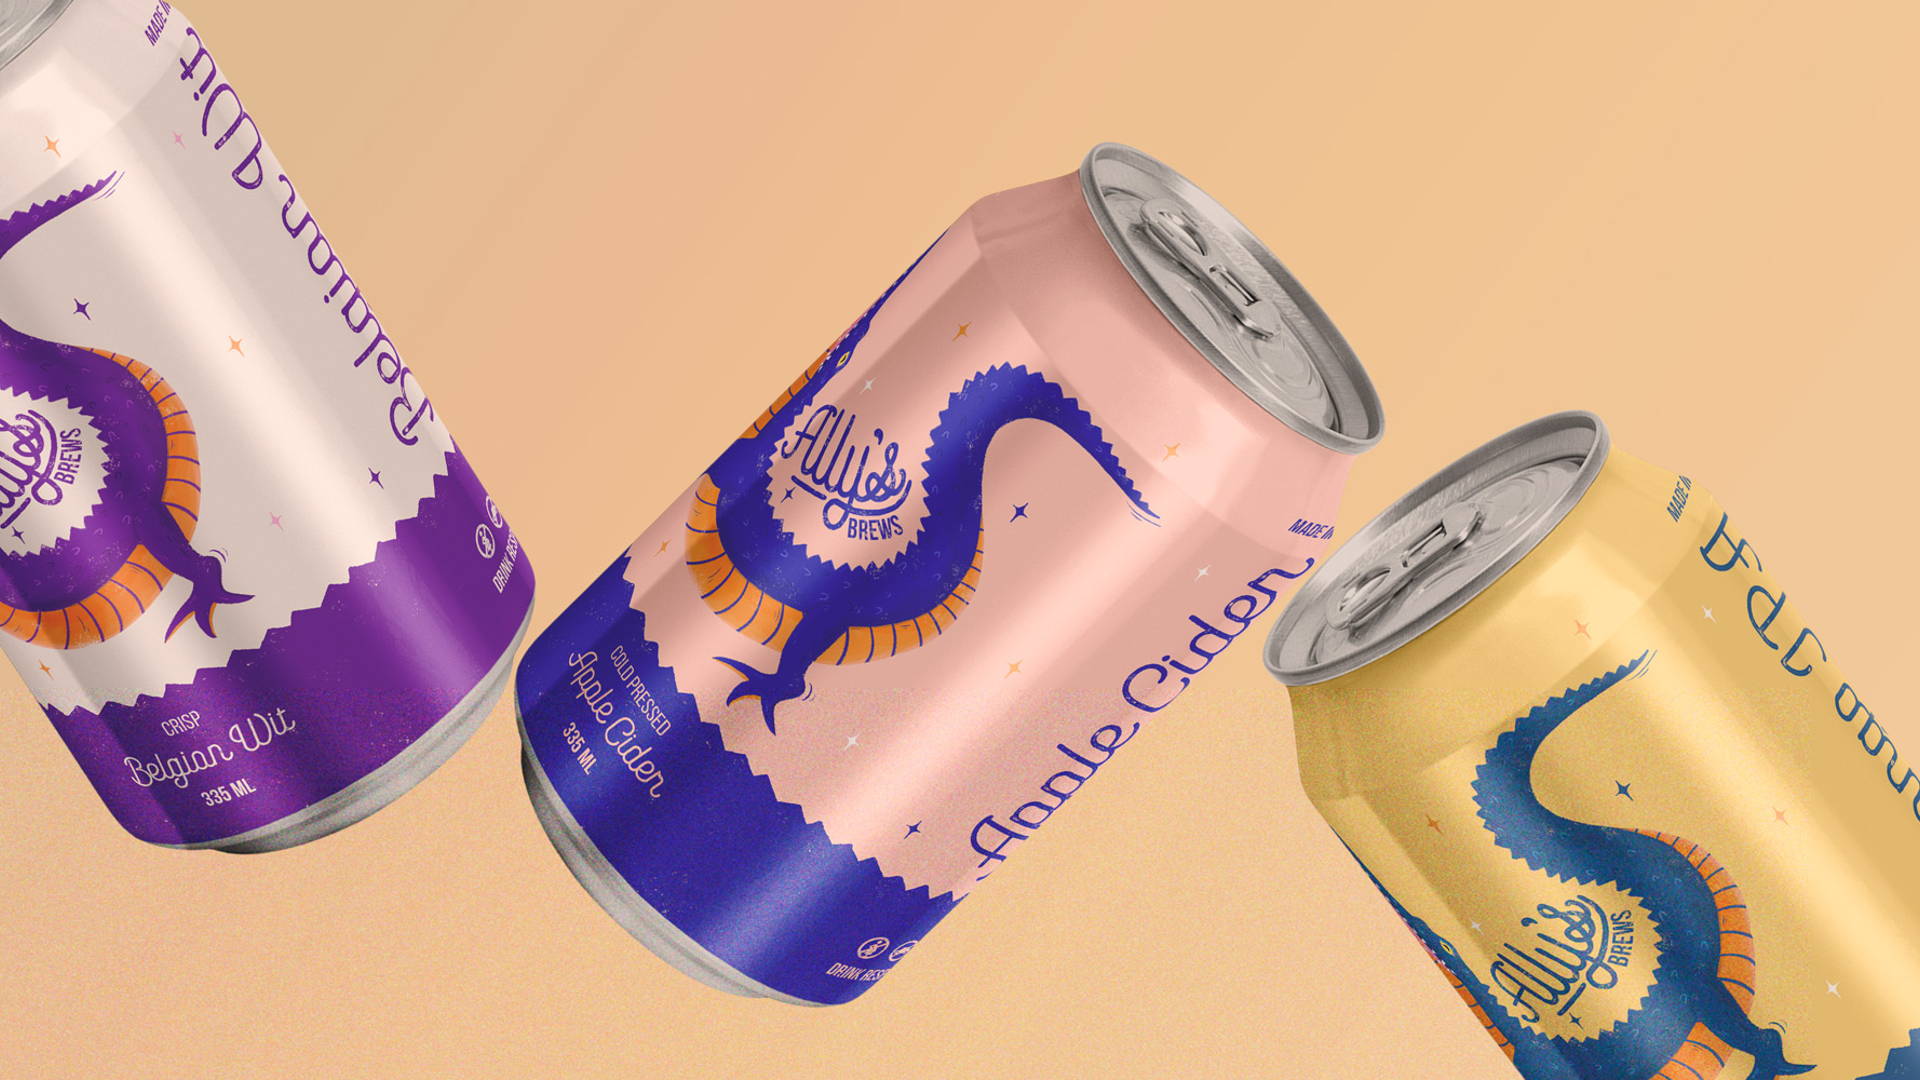 Featured image for Archana and Co Creates a Fun, Illustrated Beer Label Concept With Ally’s Brews